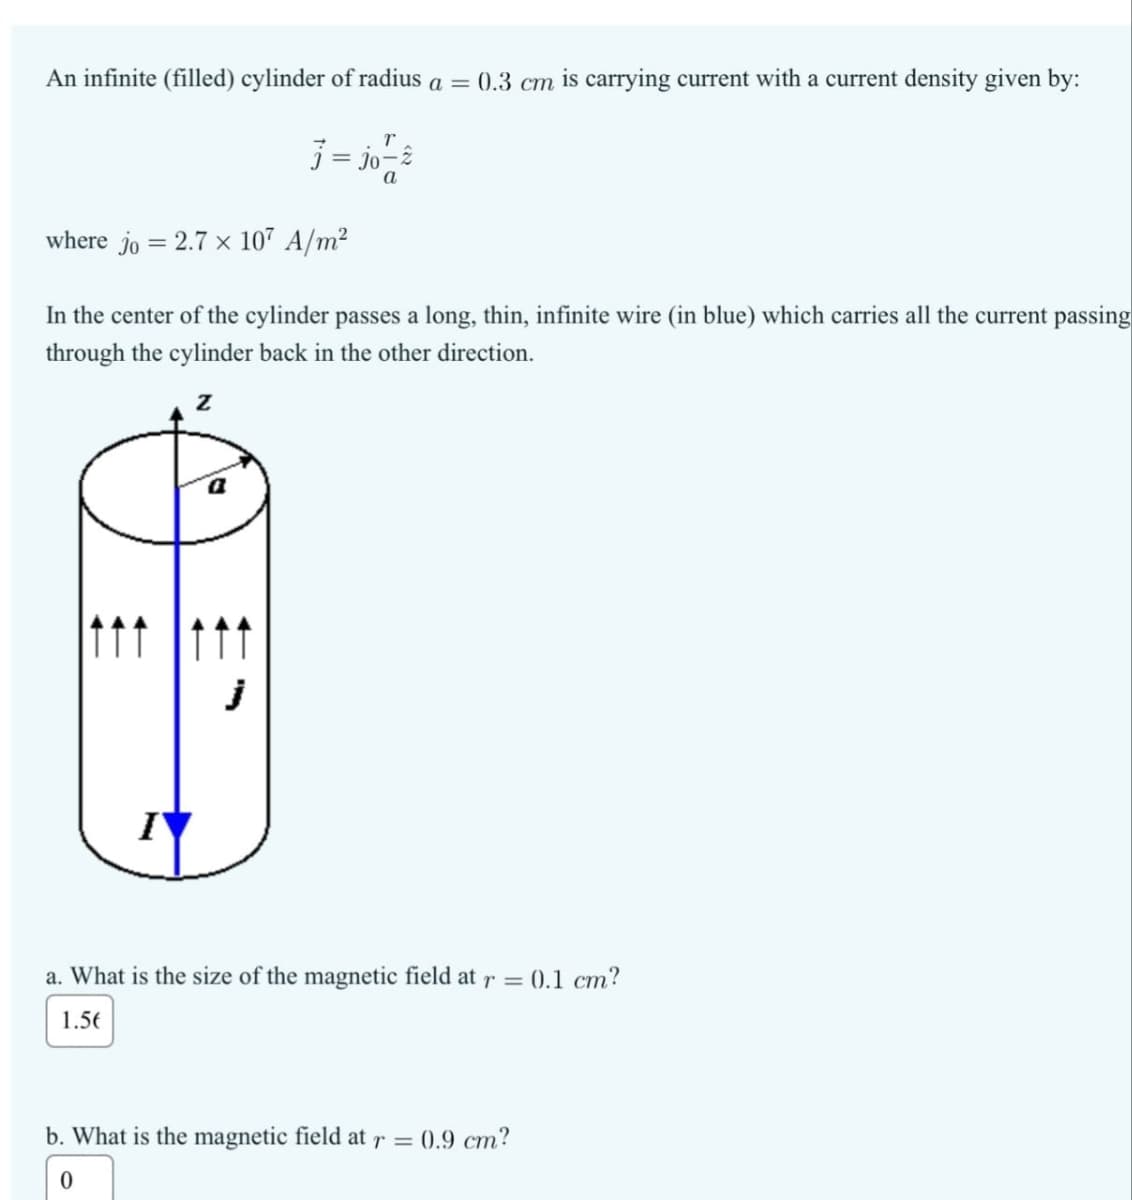 An infinite (filled) cylinder of radius a = 0.3 cm is carrying current with a current density given by:
T
j= jo-
where jo = 2.7 × 107 A/m²
In the center of the cylinder passes a long, thin, infinite wire (in blue) which carries all the current passing
through the cylinder back in the other direction.
Z
I
a. What is the size of the magnetic field at r = 0.1 cm?
1.56
b. What is the magnetic field at r =
0
0.9 cm?